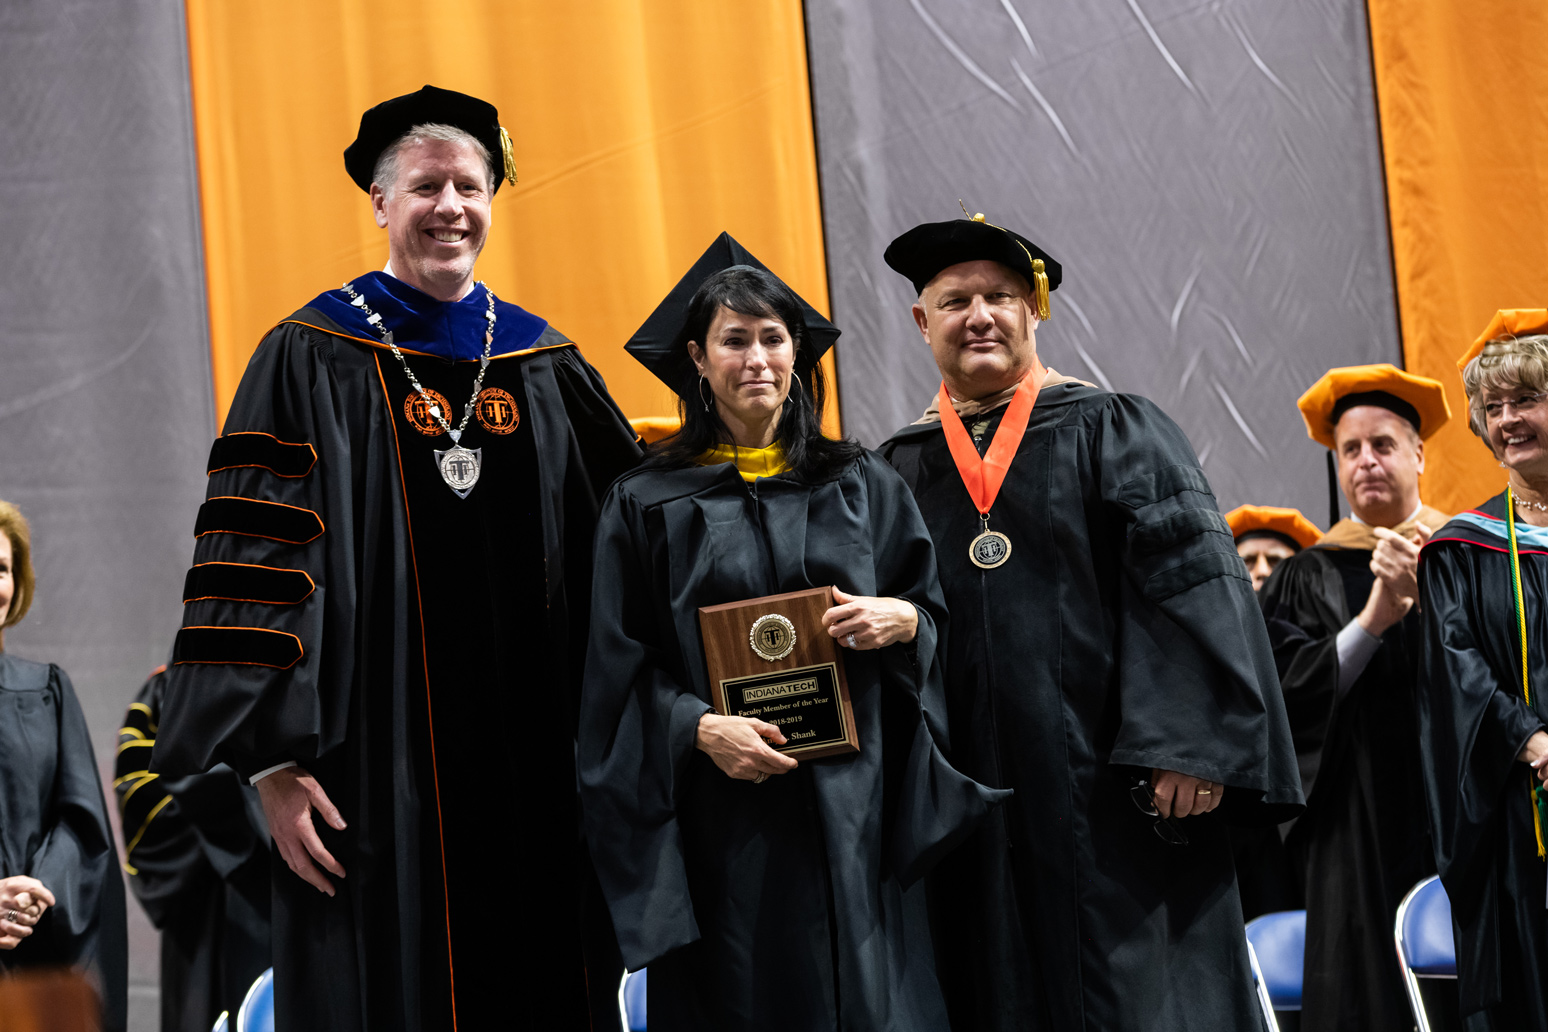 Assistant Professor of Biology Amy Shank, middle, stands with President Einolf, left, and Vice President for Academic Affairs Dr. Tom Kaplan after earning the 2019 Faculty of the Year award.